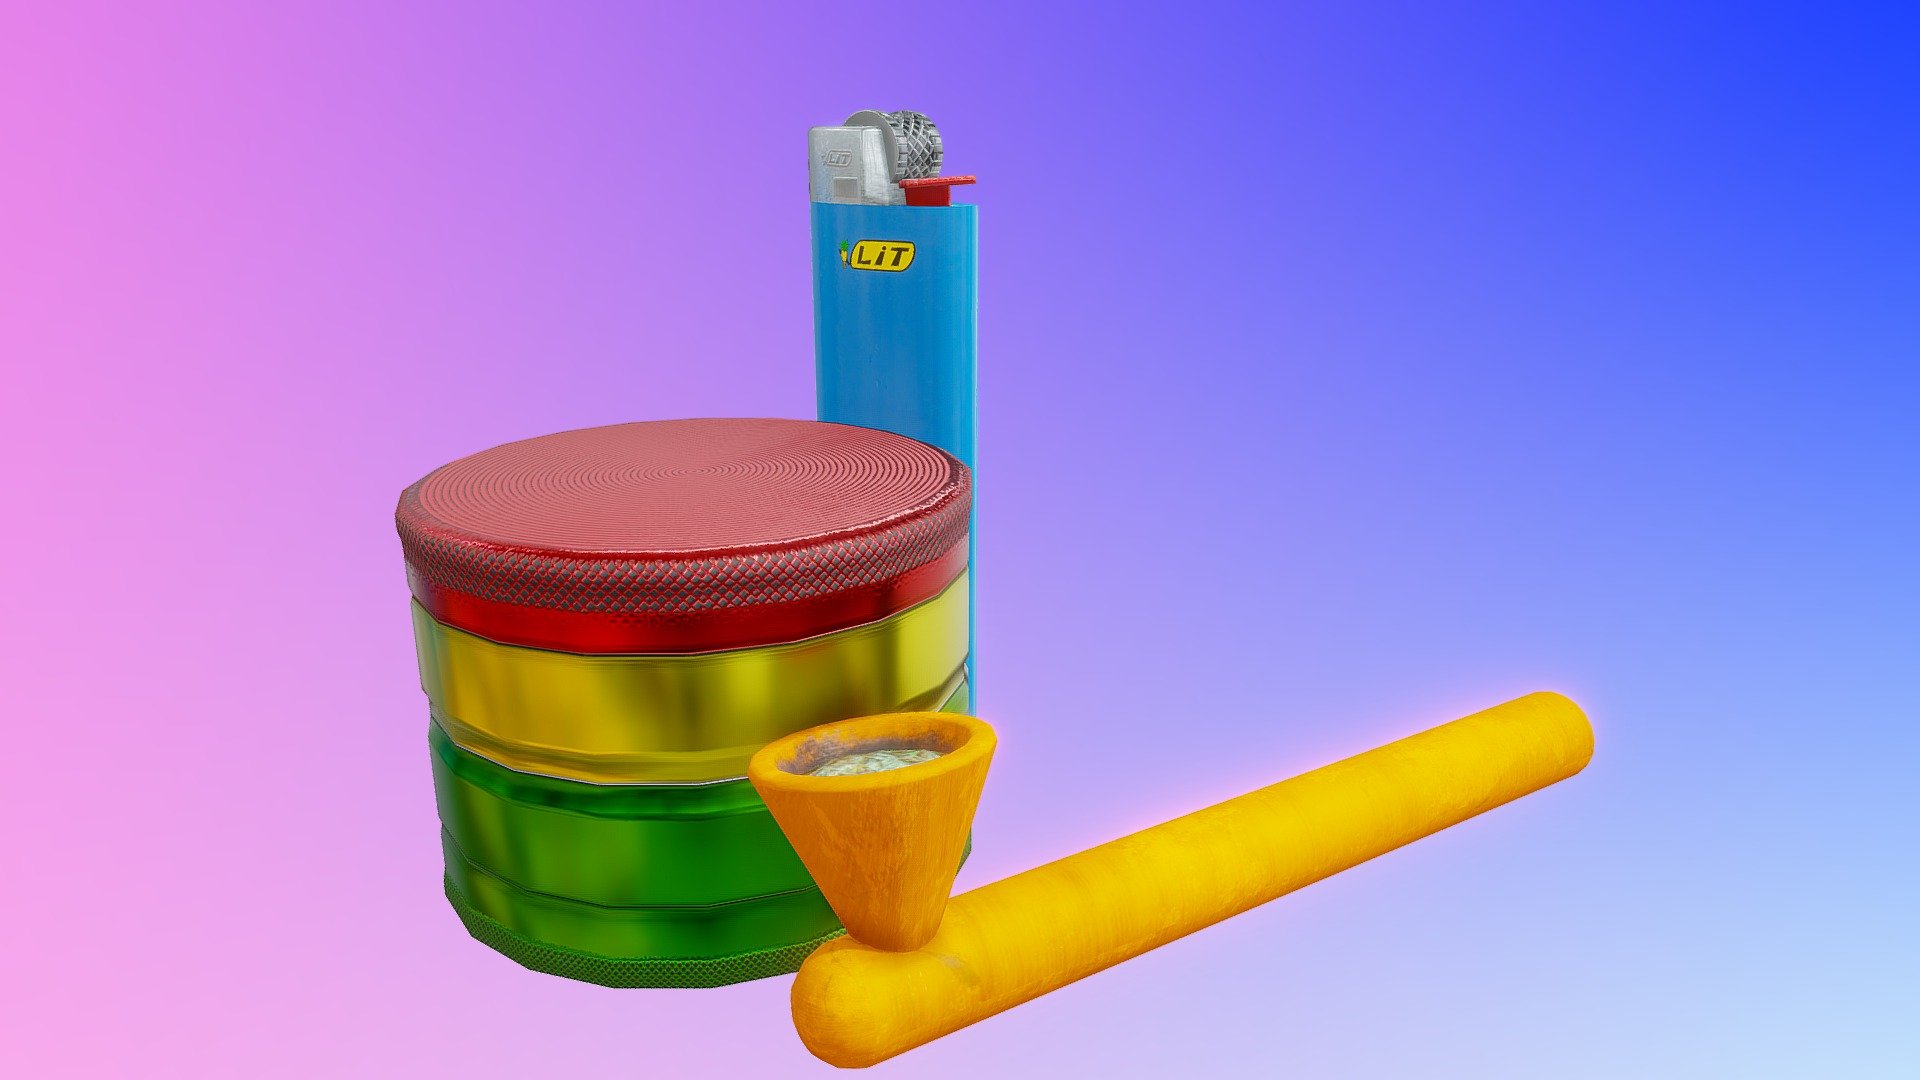 Clay pipe, Bic lighter and rasta color grinder. 

Im planning on making this mesh a mod for The Sims 4

Don't forget to give me a like 👍 - Weed Clutter 01 - 3D model by CohiTrippy 3d model